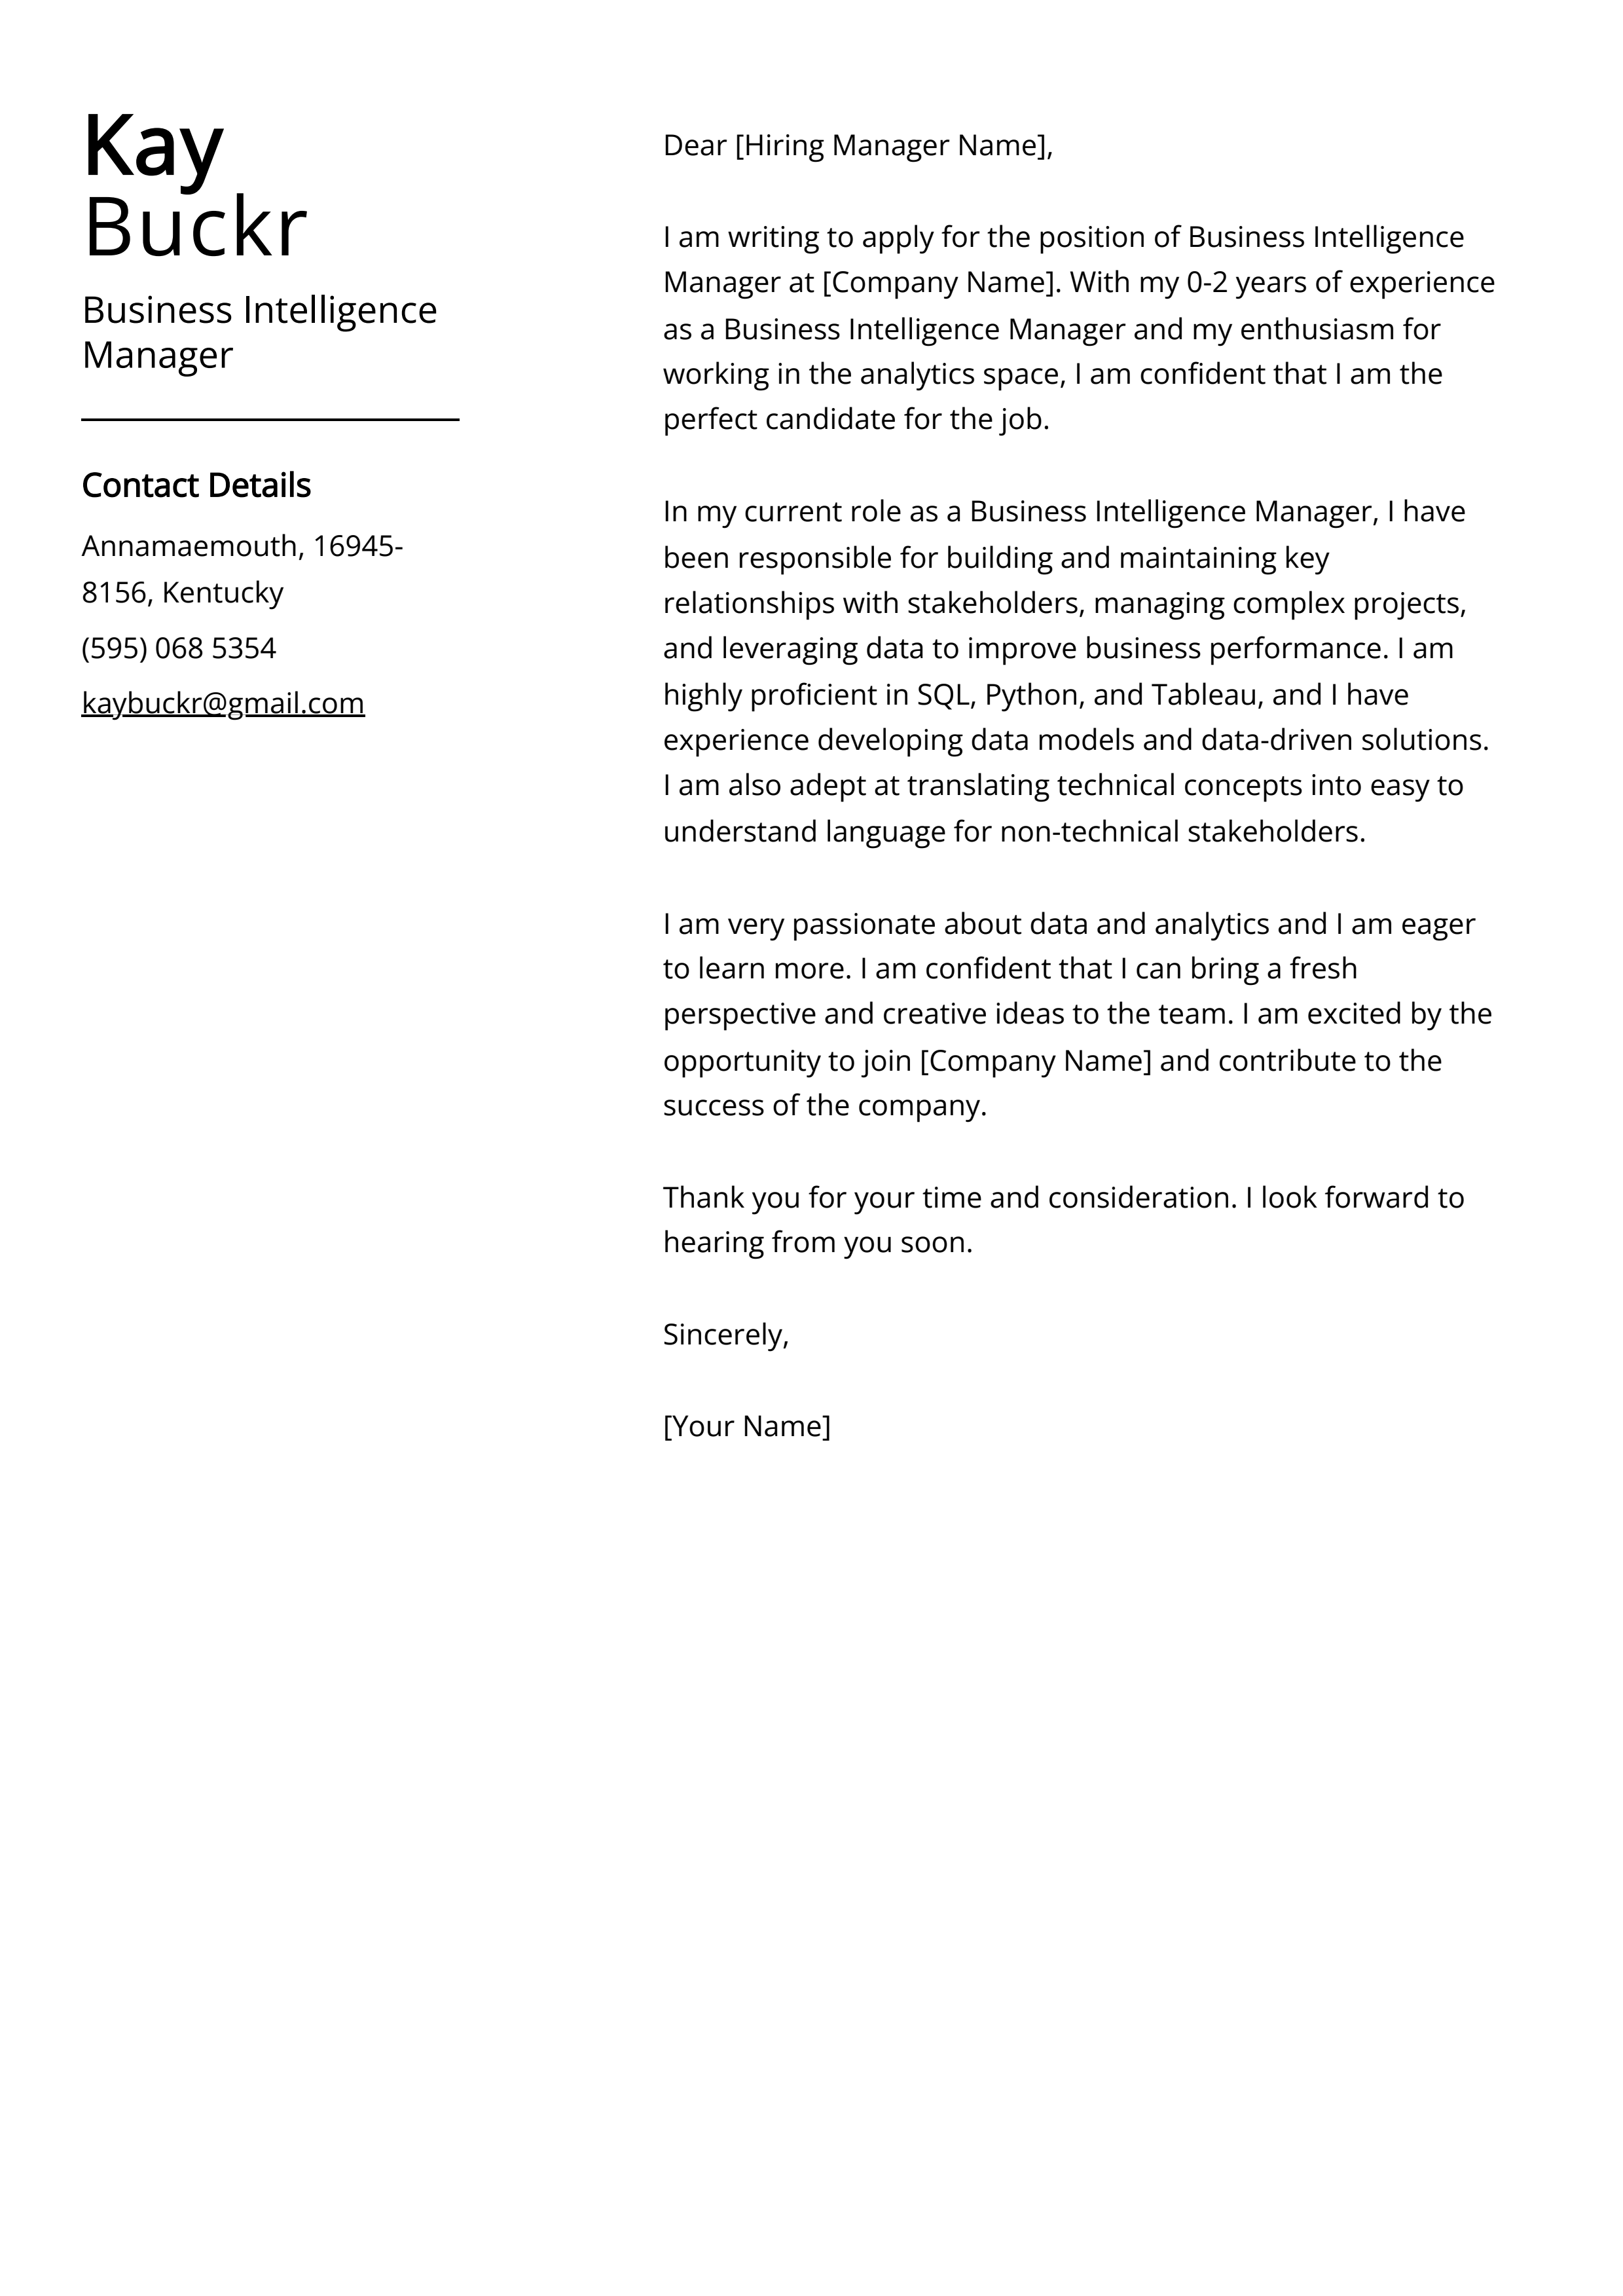 Business Intelligence Manager Cover Letter Example